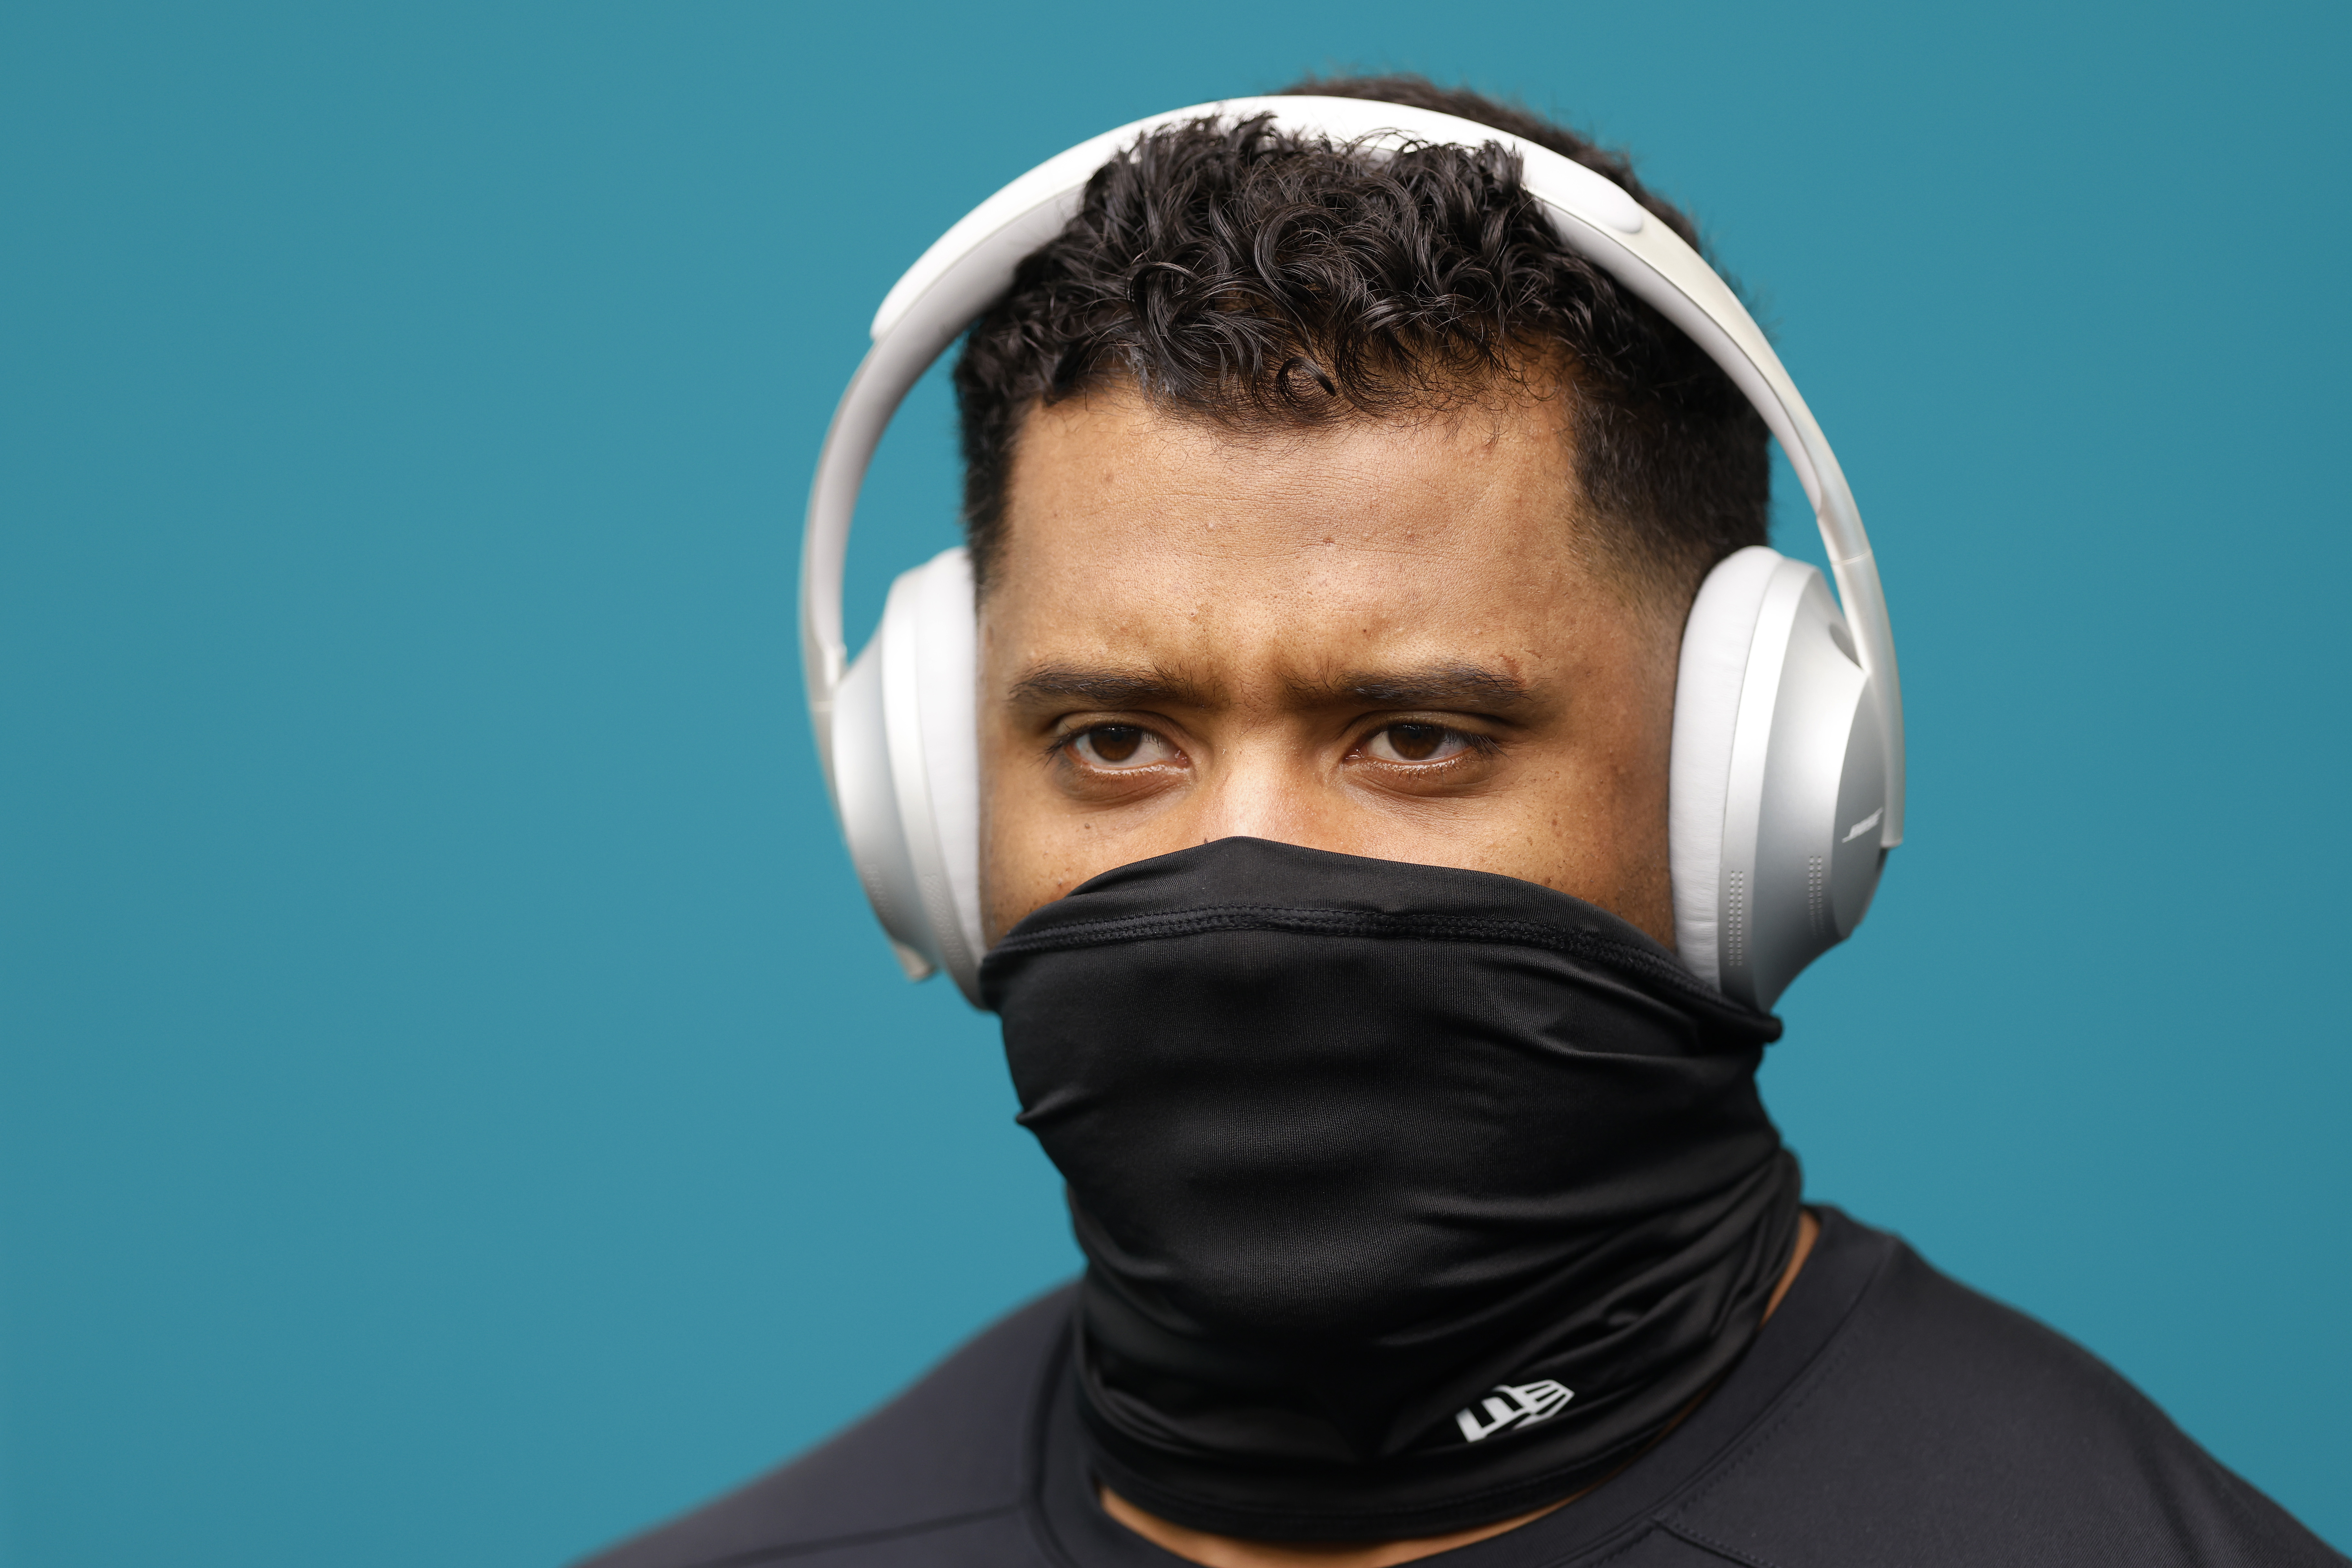 Russell Wilson of the Seattle Seahawks takes the field prior to a game